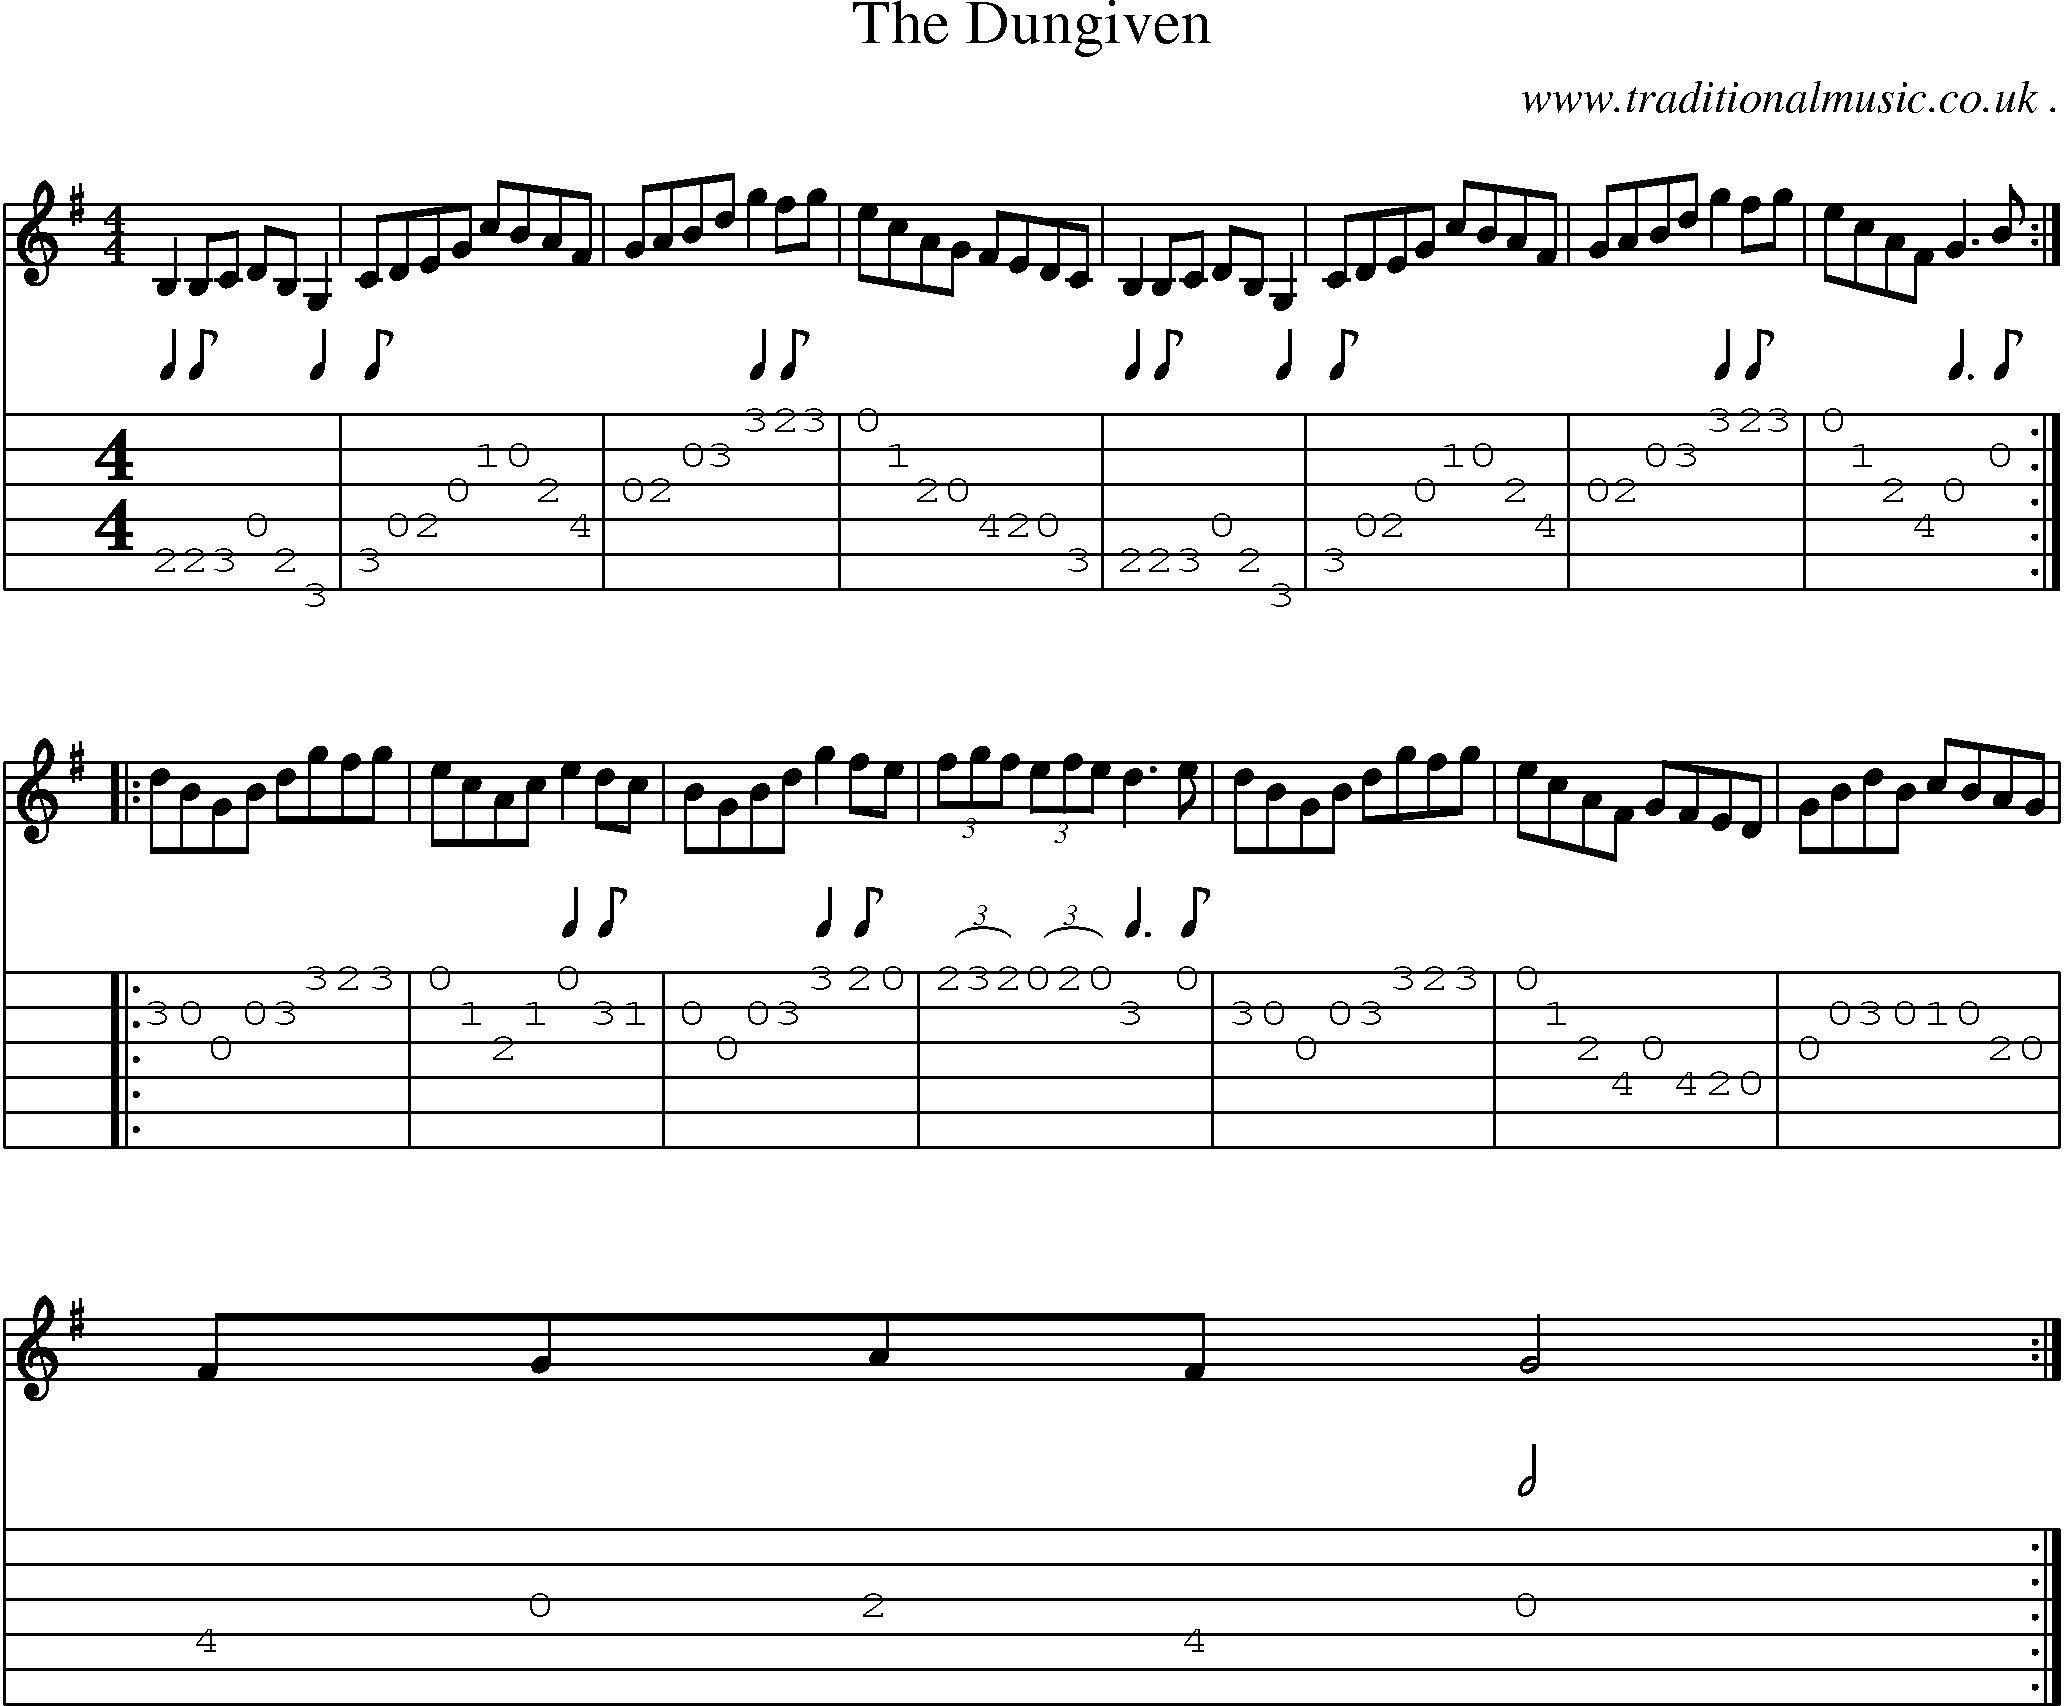 Sheet-Music and Guitar Tabs for The Dungiven